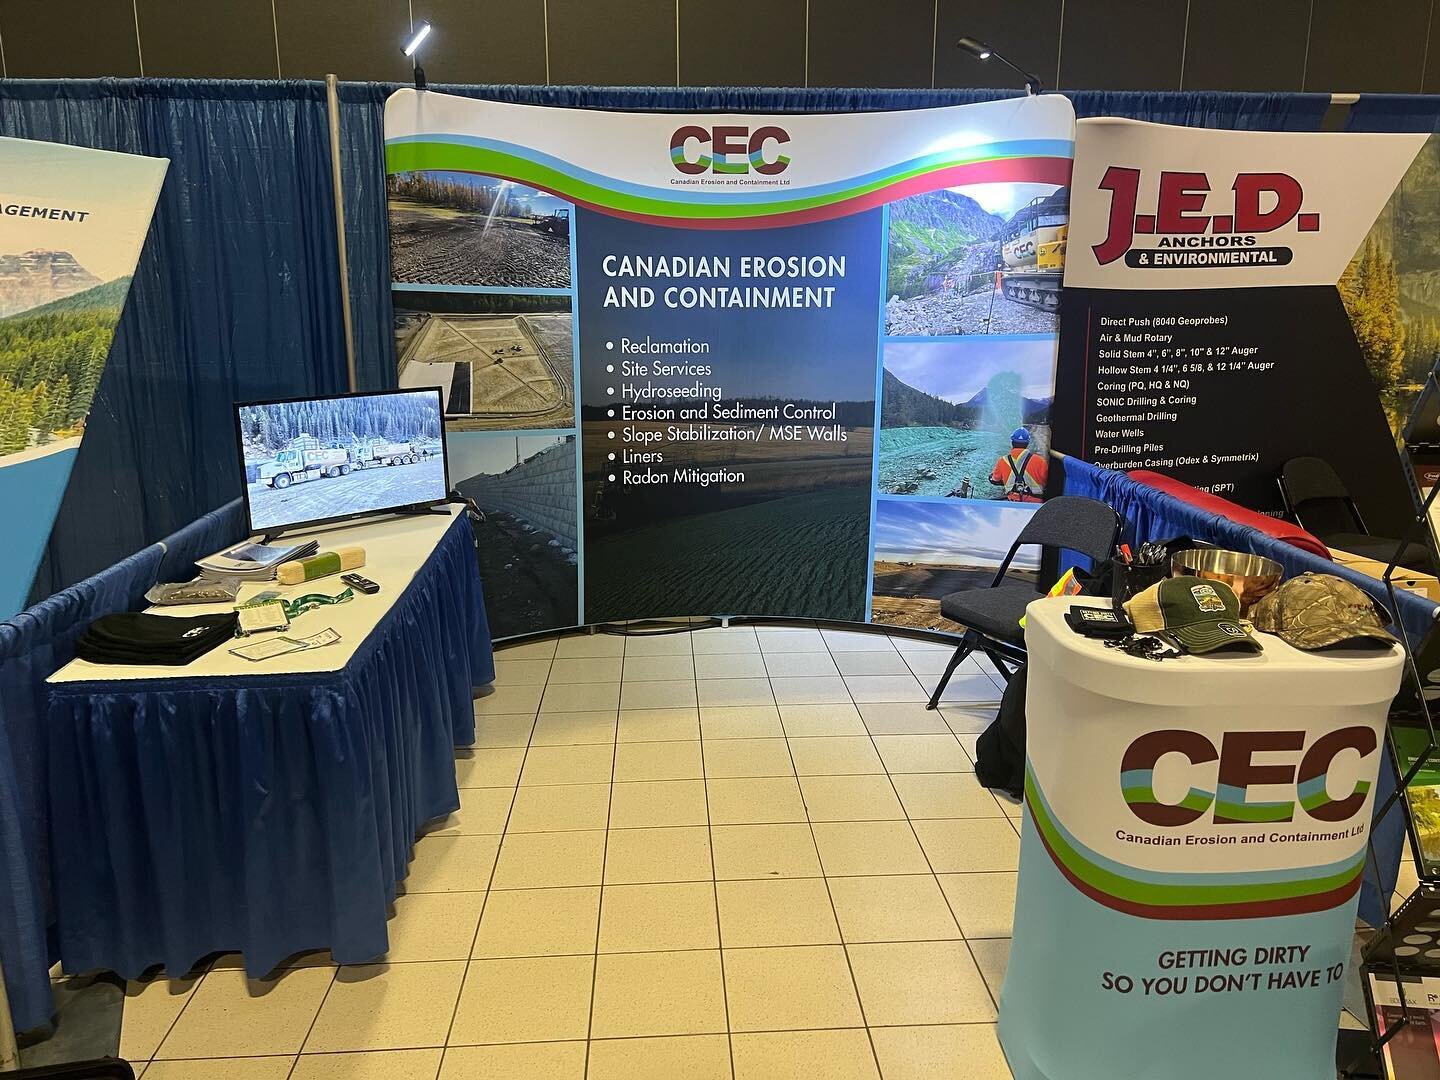 Stop by and say g&rsquo;day to the cec team at booth 5 at the #CLRA confrence in Edmonton.

#CLRA2023 #cec2023 #reclamation #hydroseeding #hydromulch #clraedmonton